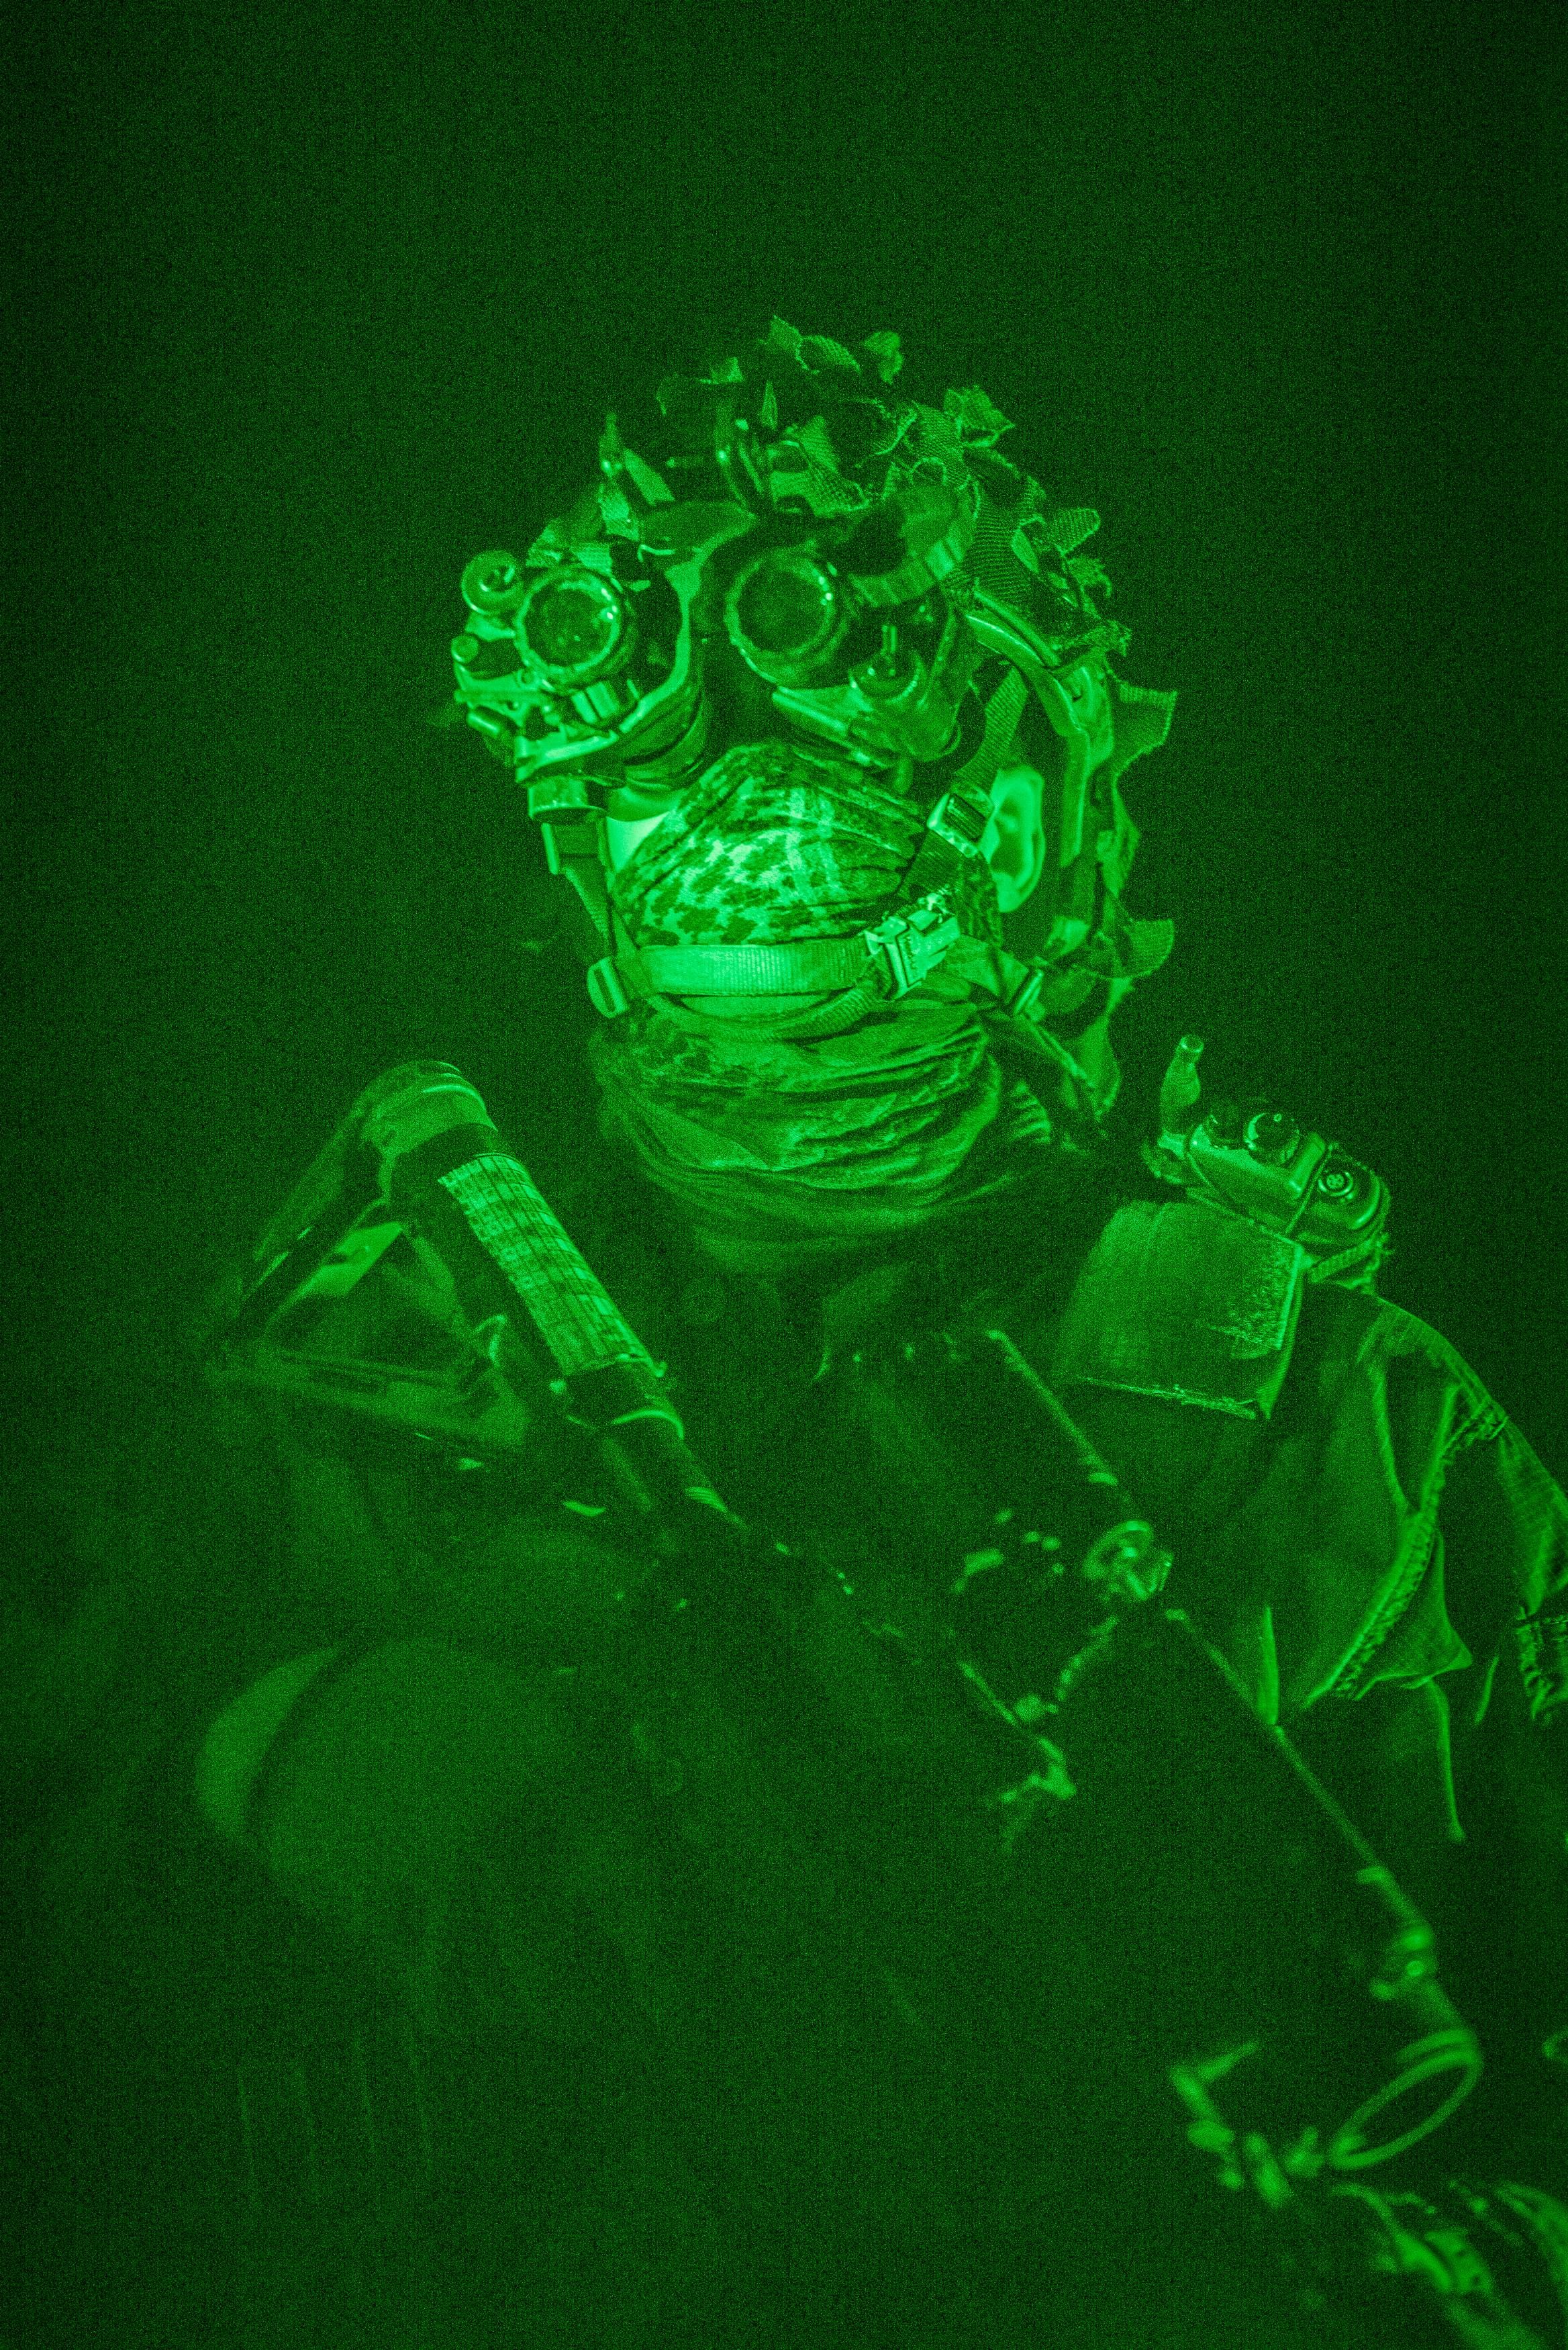 Soldier from Telemark battalion, with night vision goggles. Military picture, Military wallpaper, Military drawings